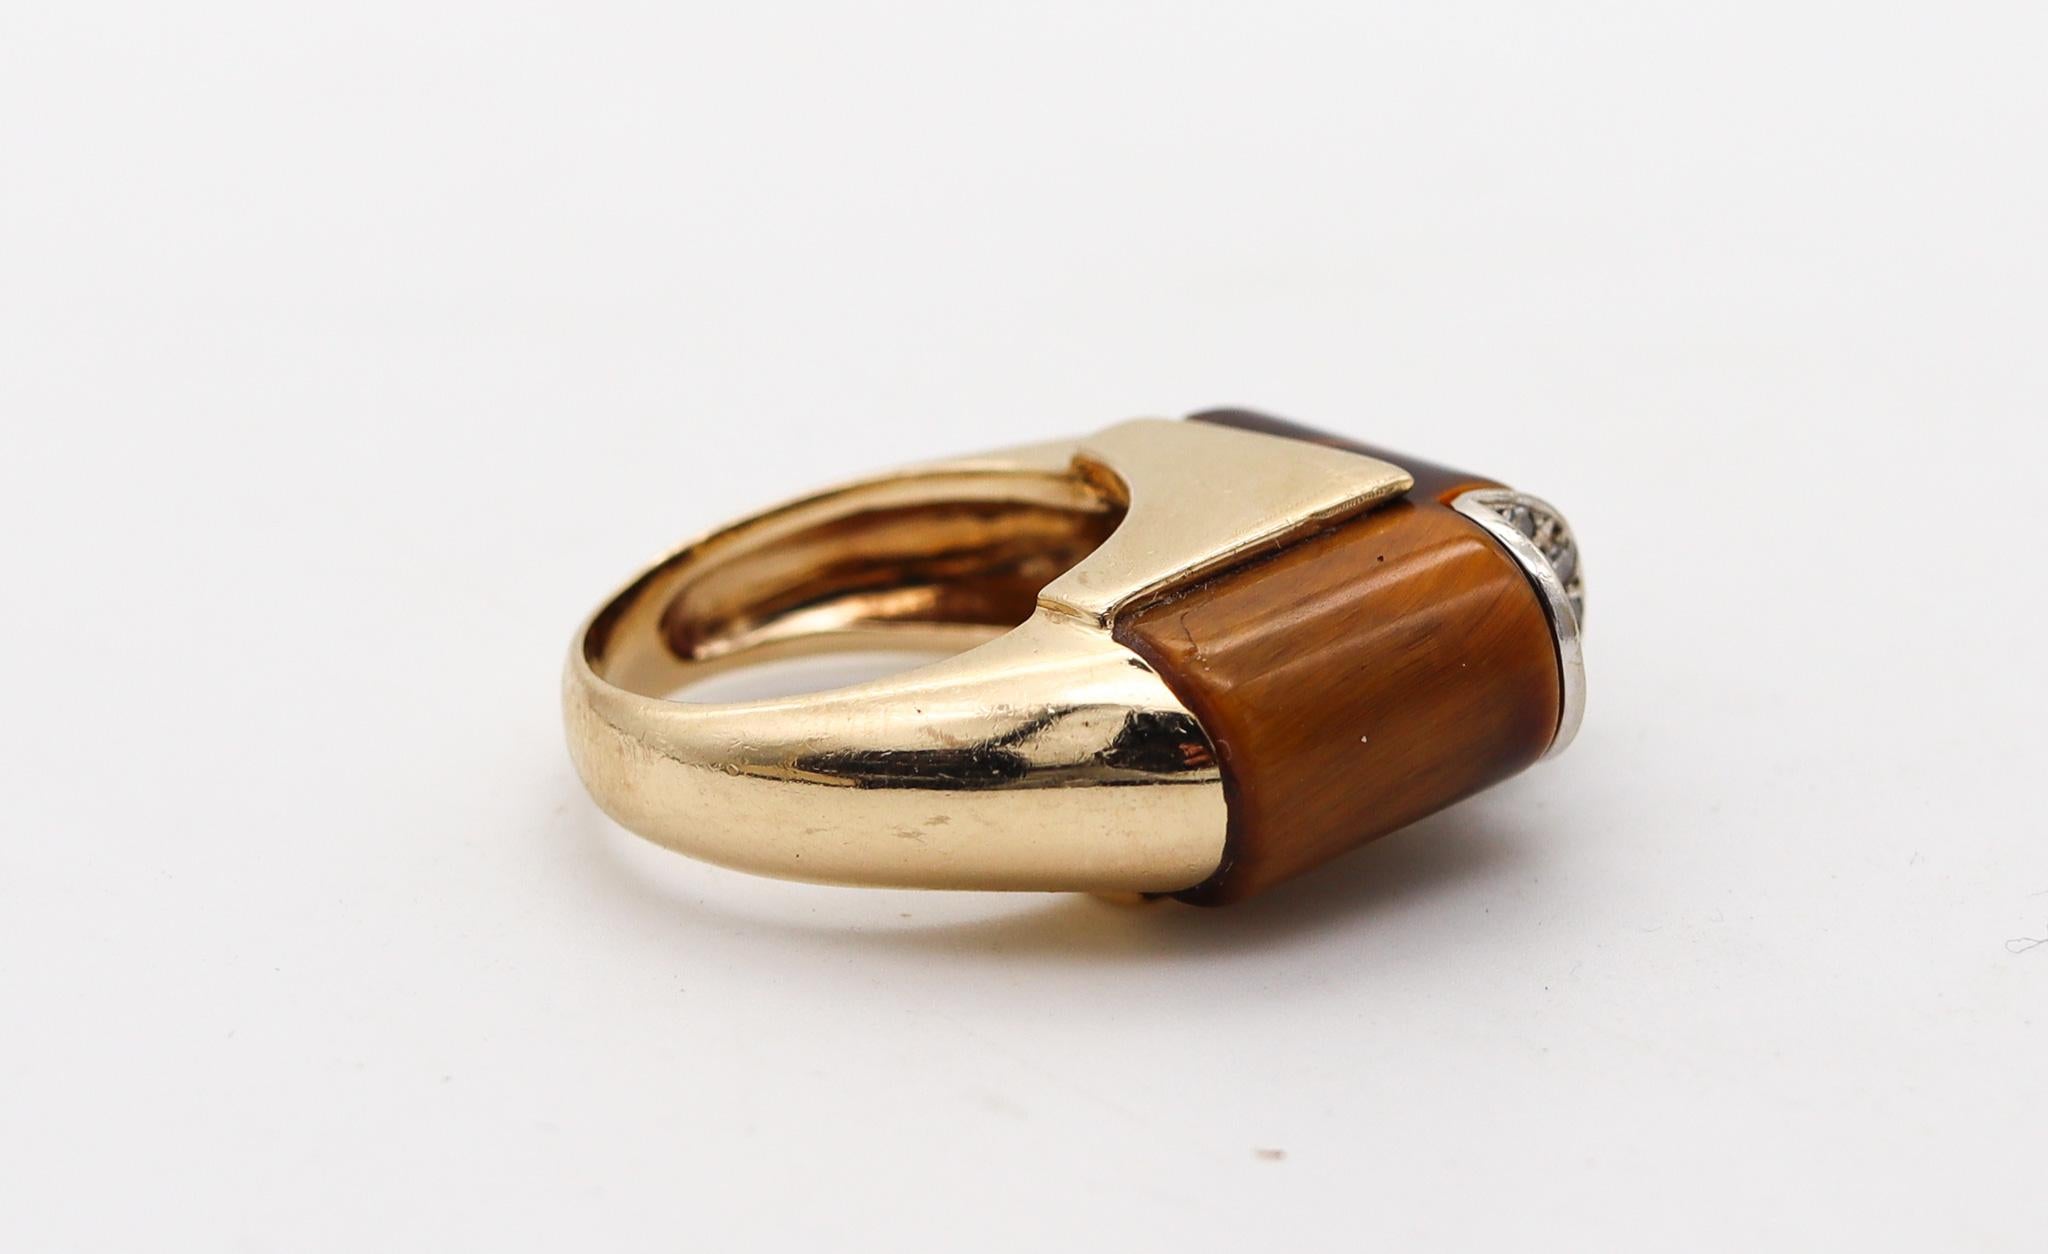 Modernist 1960 Sculptural Geometric Ring In 14Kt Gold With Diamonds & Tiger Eye In Excellent Condition For Sale In Miami, FL